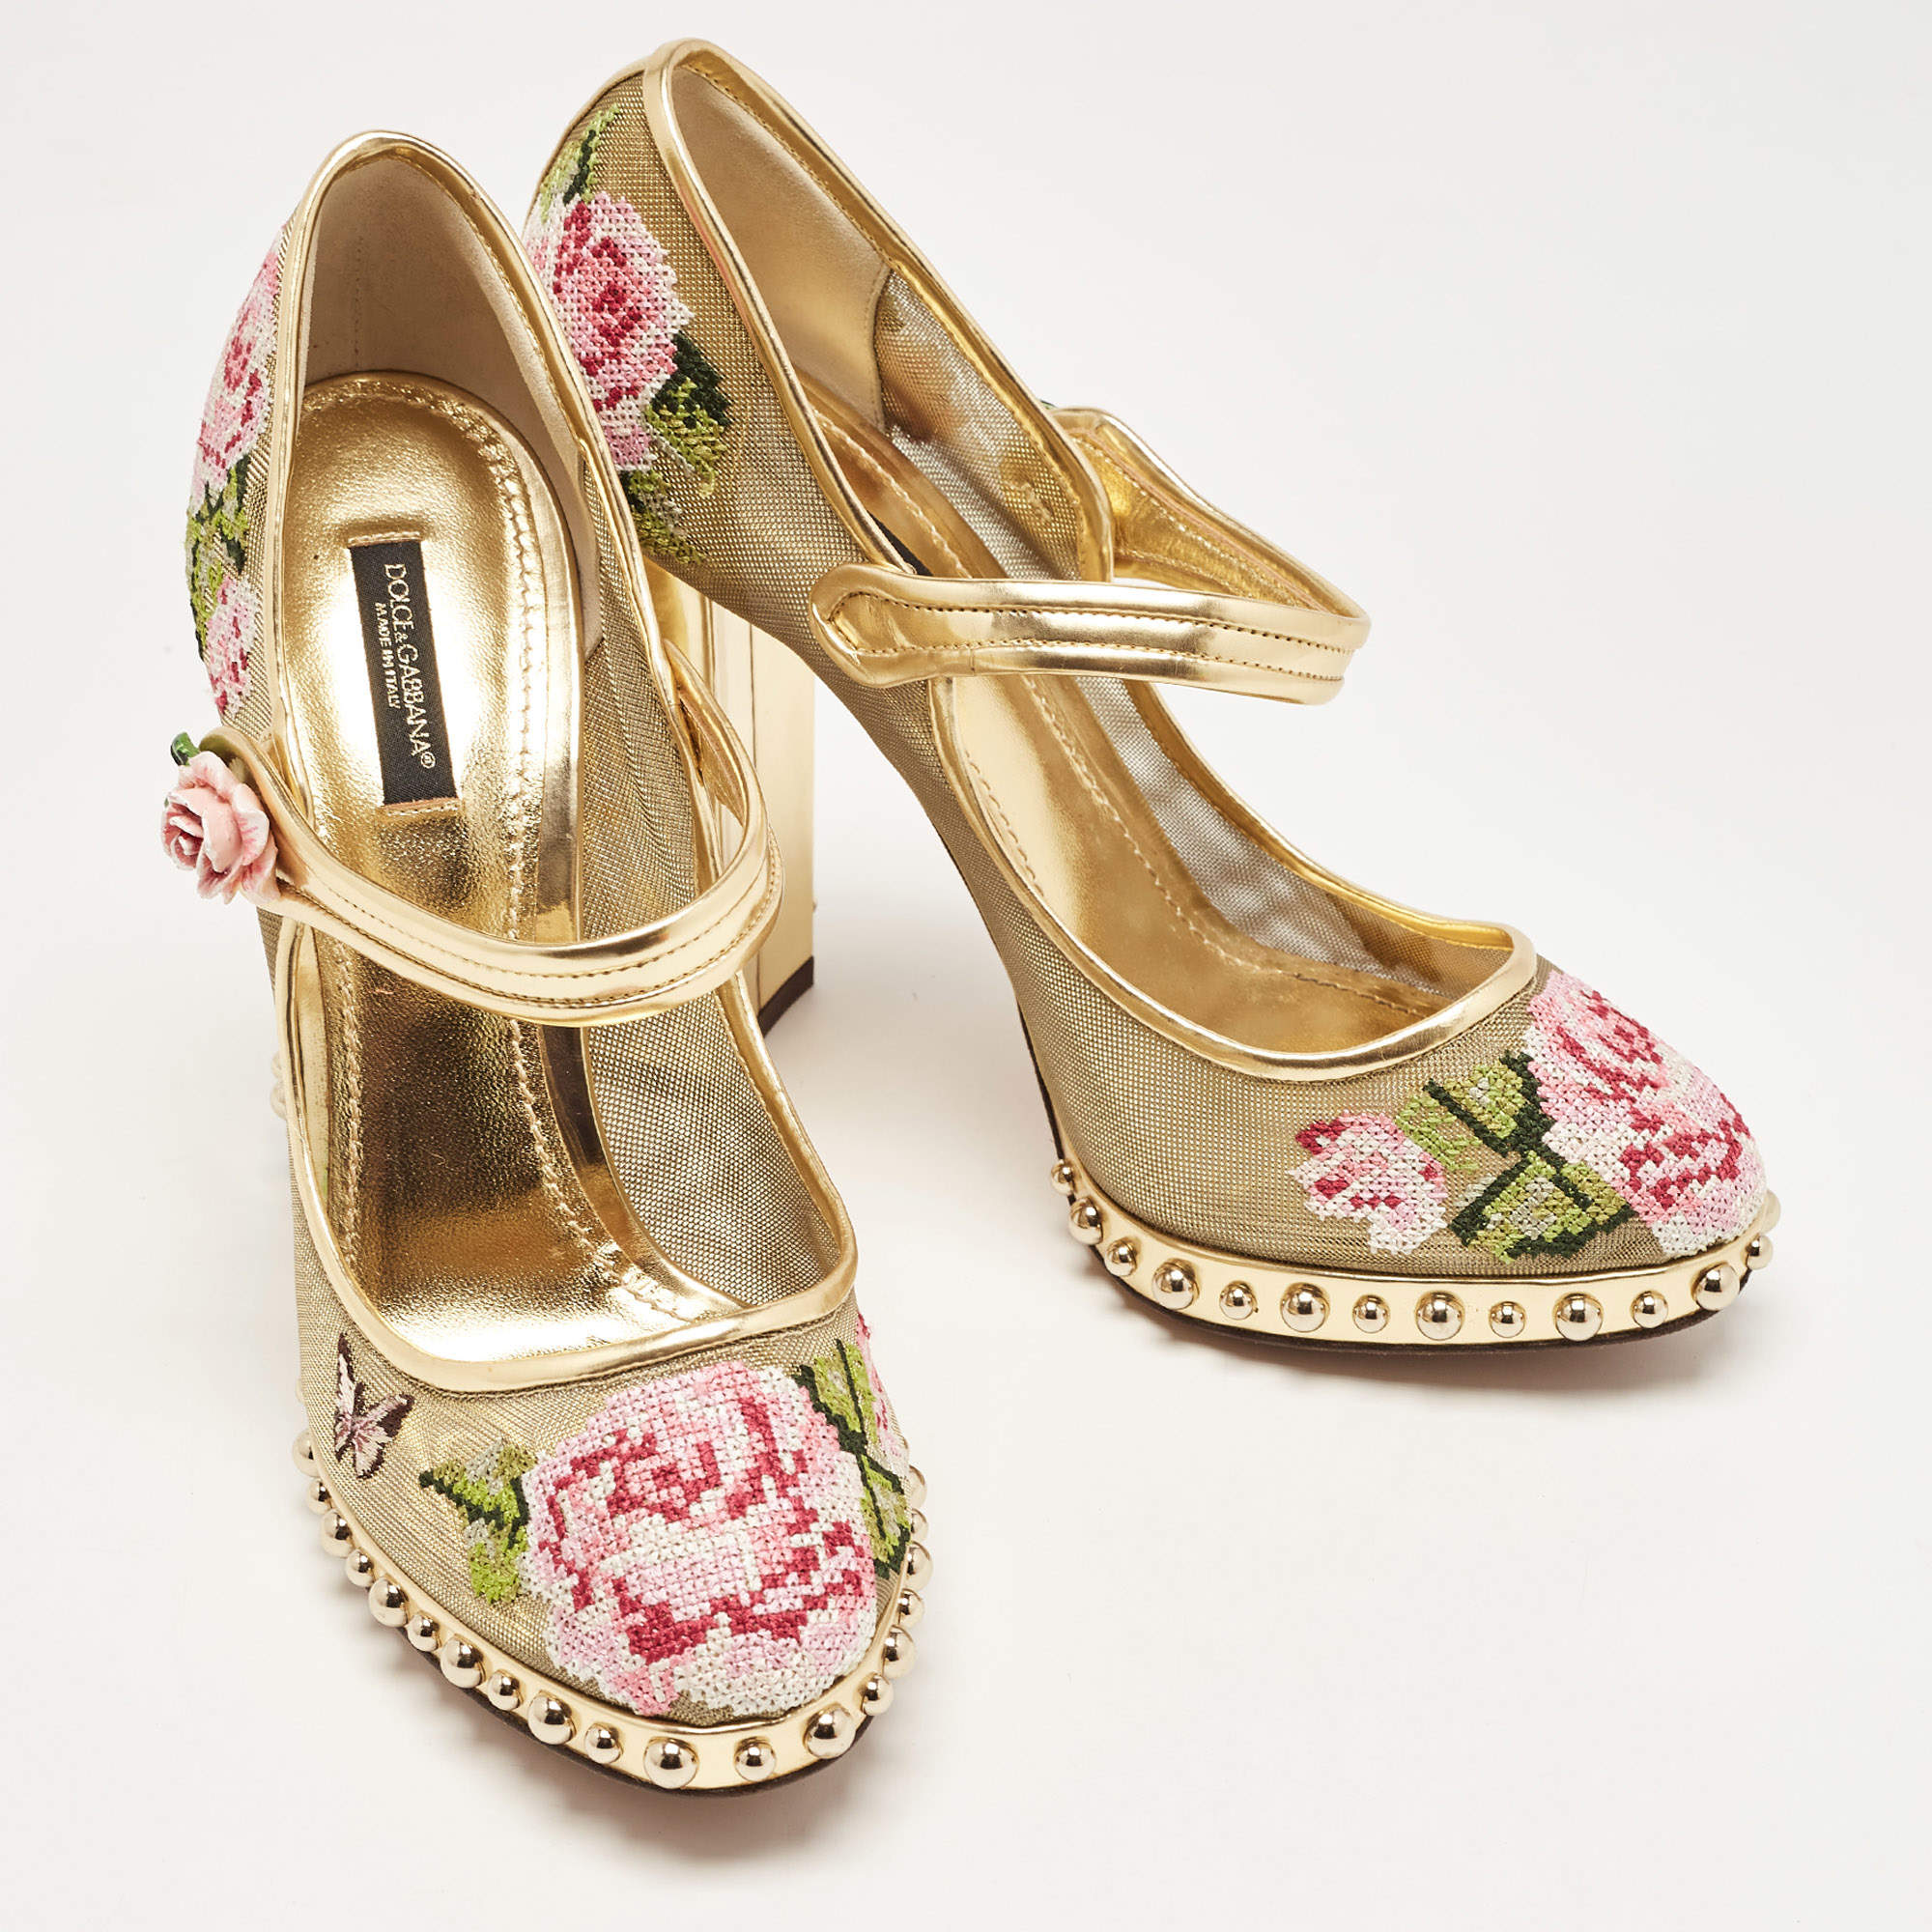 dolce gabbana mary jane sculpted heel pumps item, Women's Clothing, Dolce  & Gabbana Leggings with floral motif